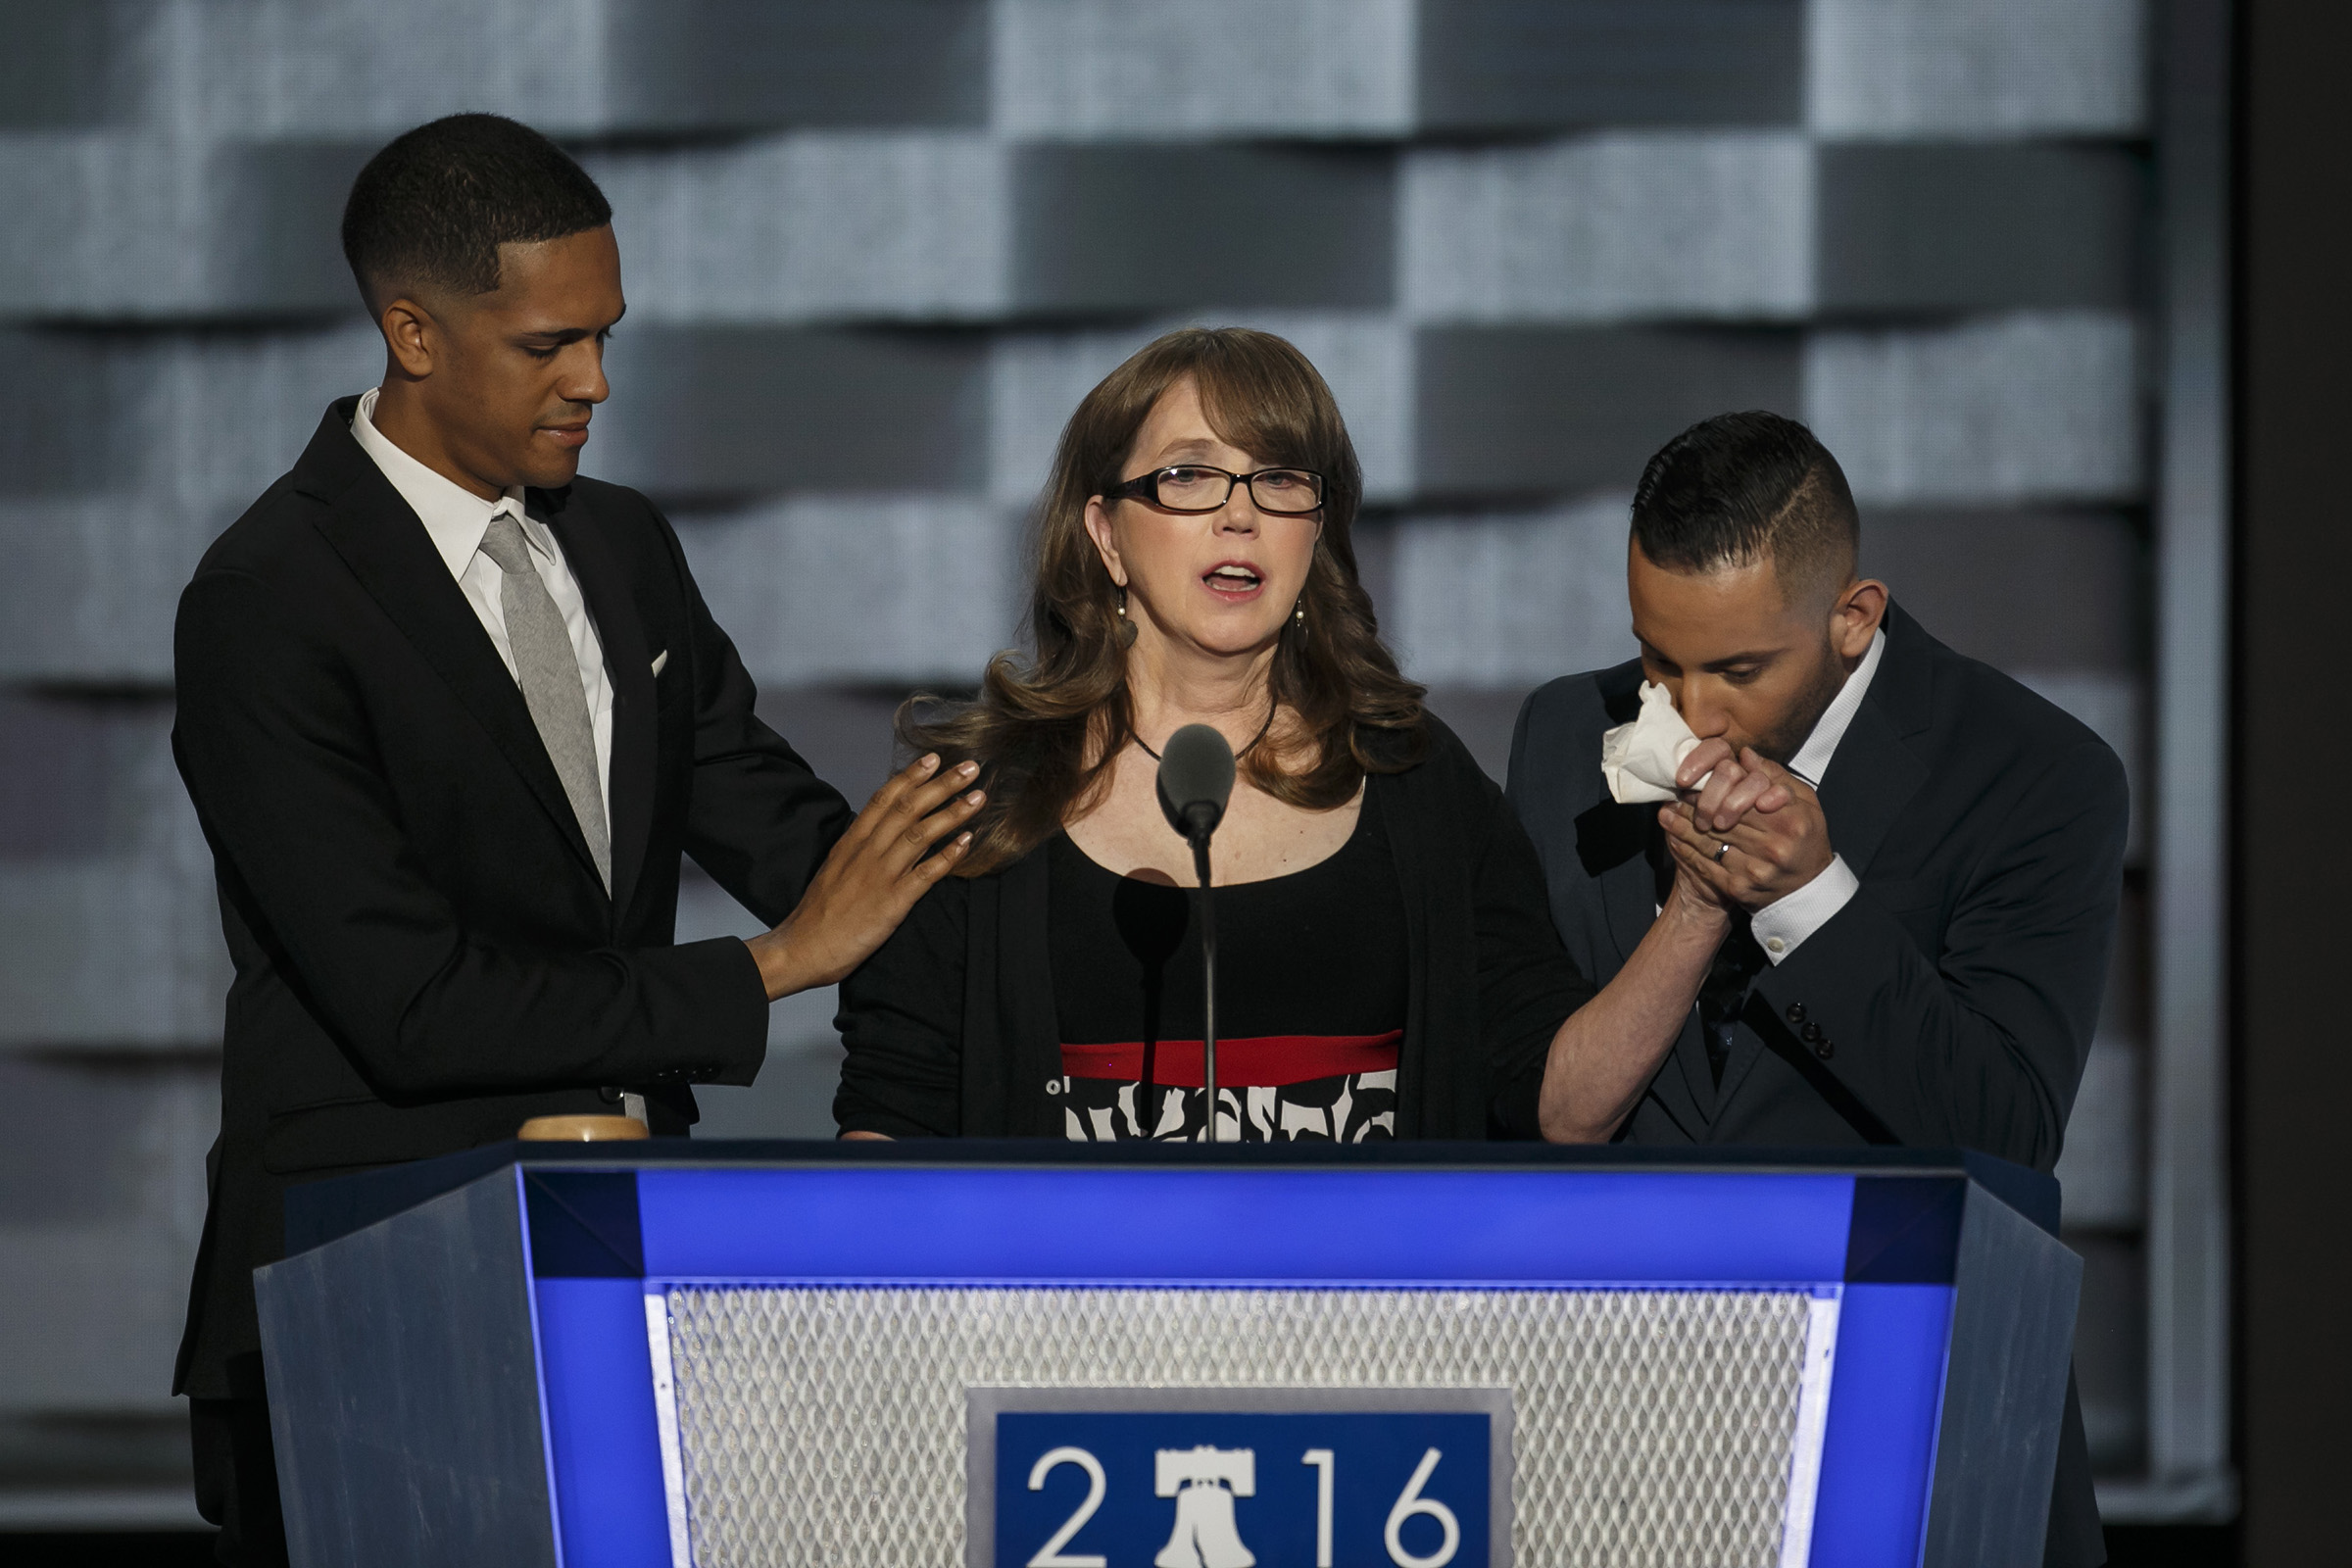 Brandon Wolf, from left, Christine Leinonen and Jose Arraigada speak about gun control at the 2016 Democratic National Convention, in Philadelphia on July 27, 2016. (Marcus Yam—Los Angeles Times via Getty Images)